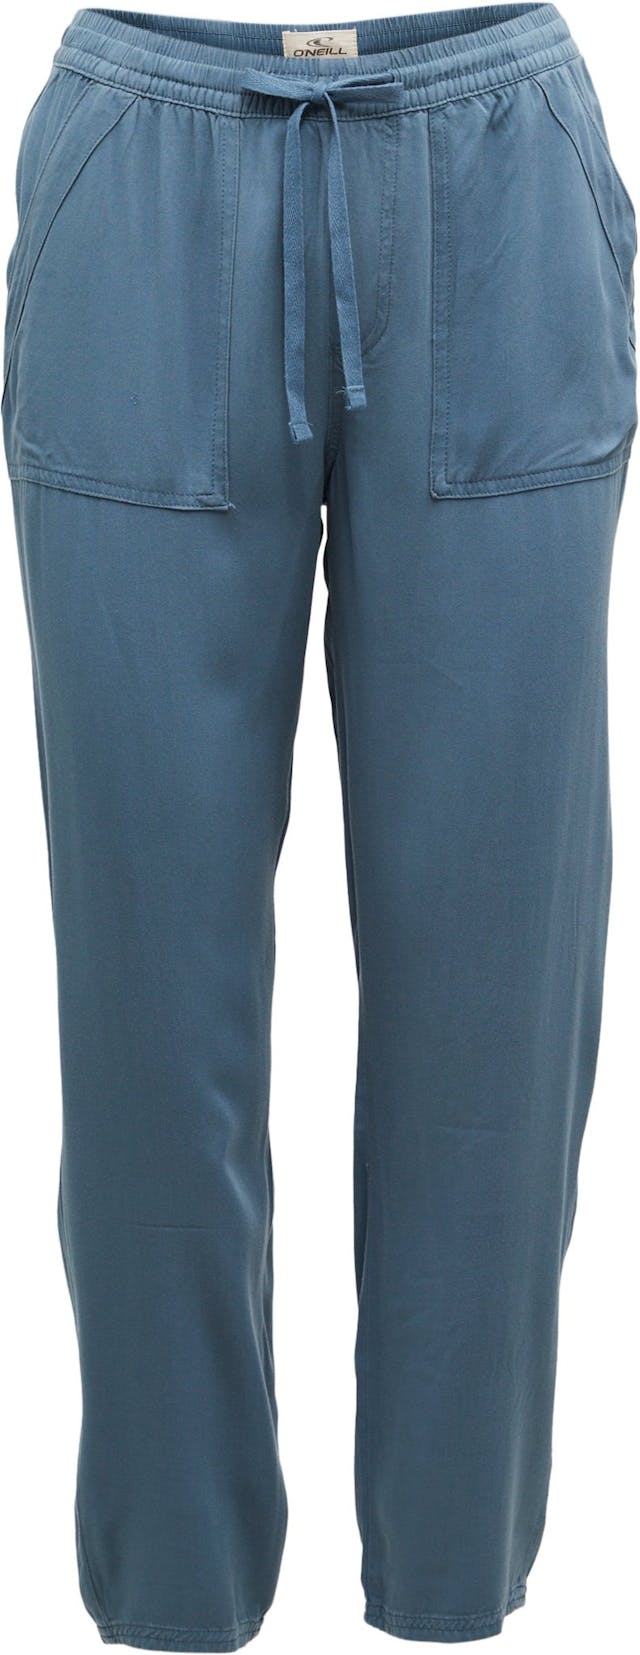 Product image for Francina Woven Pull-On Pant - Women's